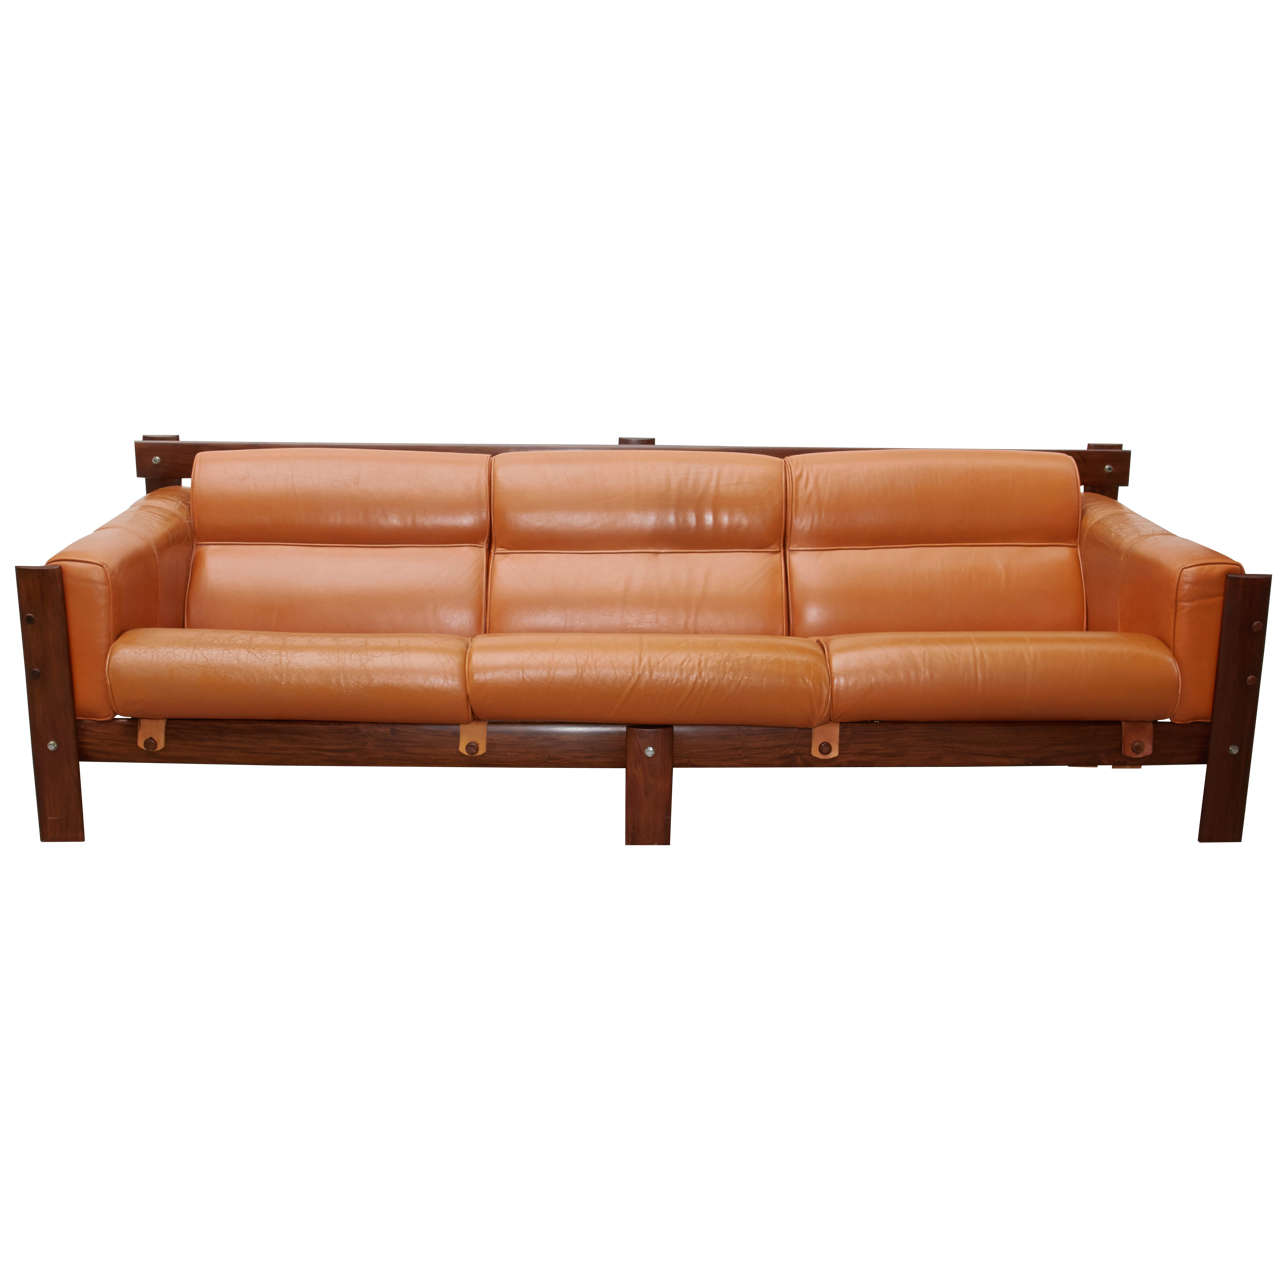 Mid-Century Sofa in Cognac Leather and Rosewood Designed by Percival Lafer